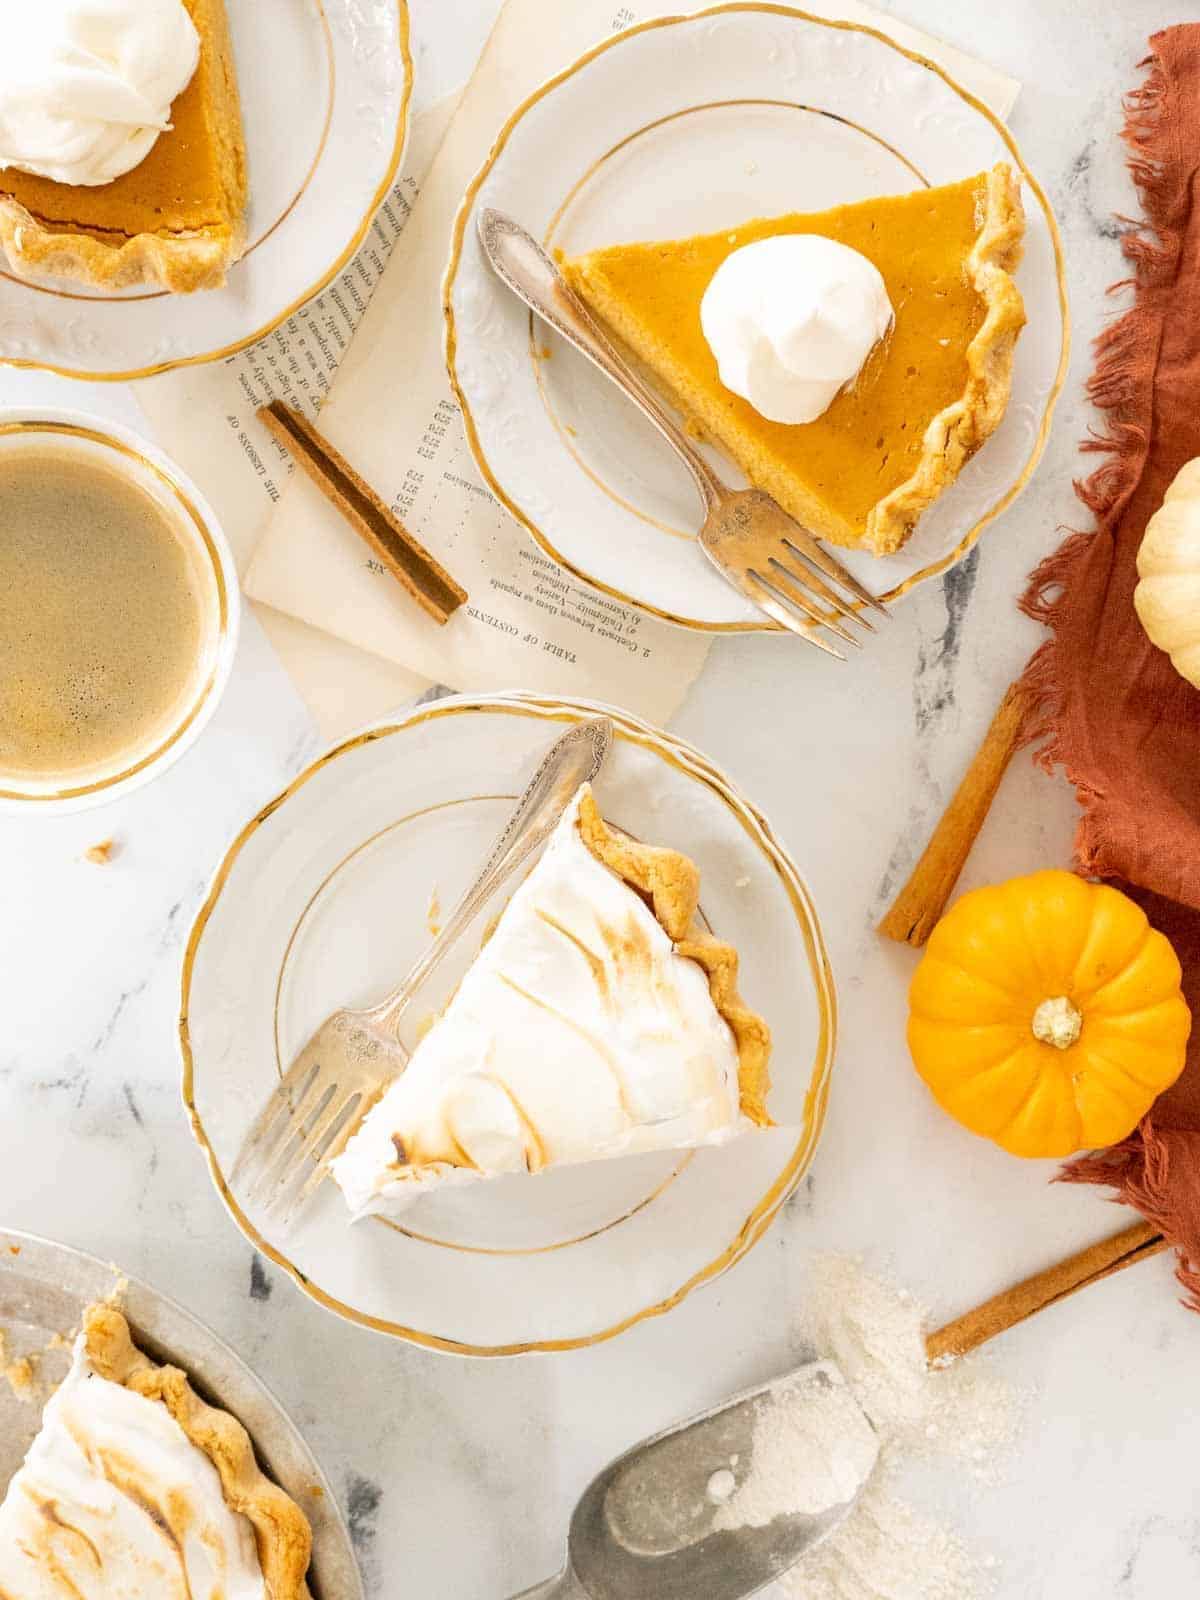 a slice of delicious sweet potato pie with a golden crust, served on a plate.